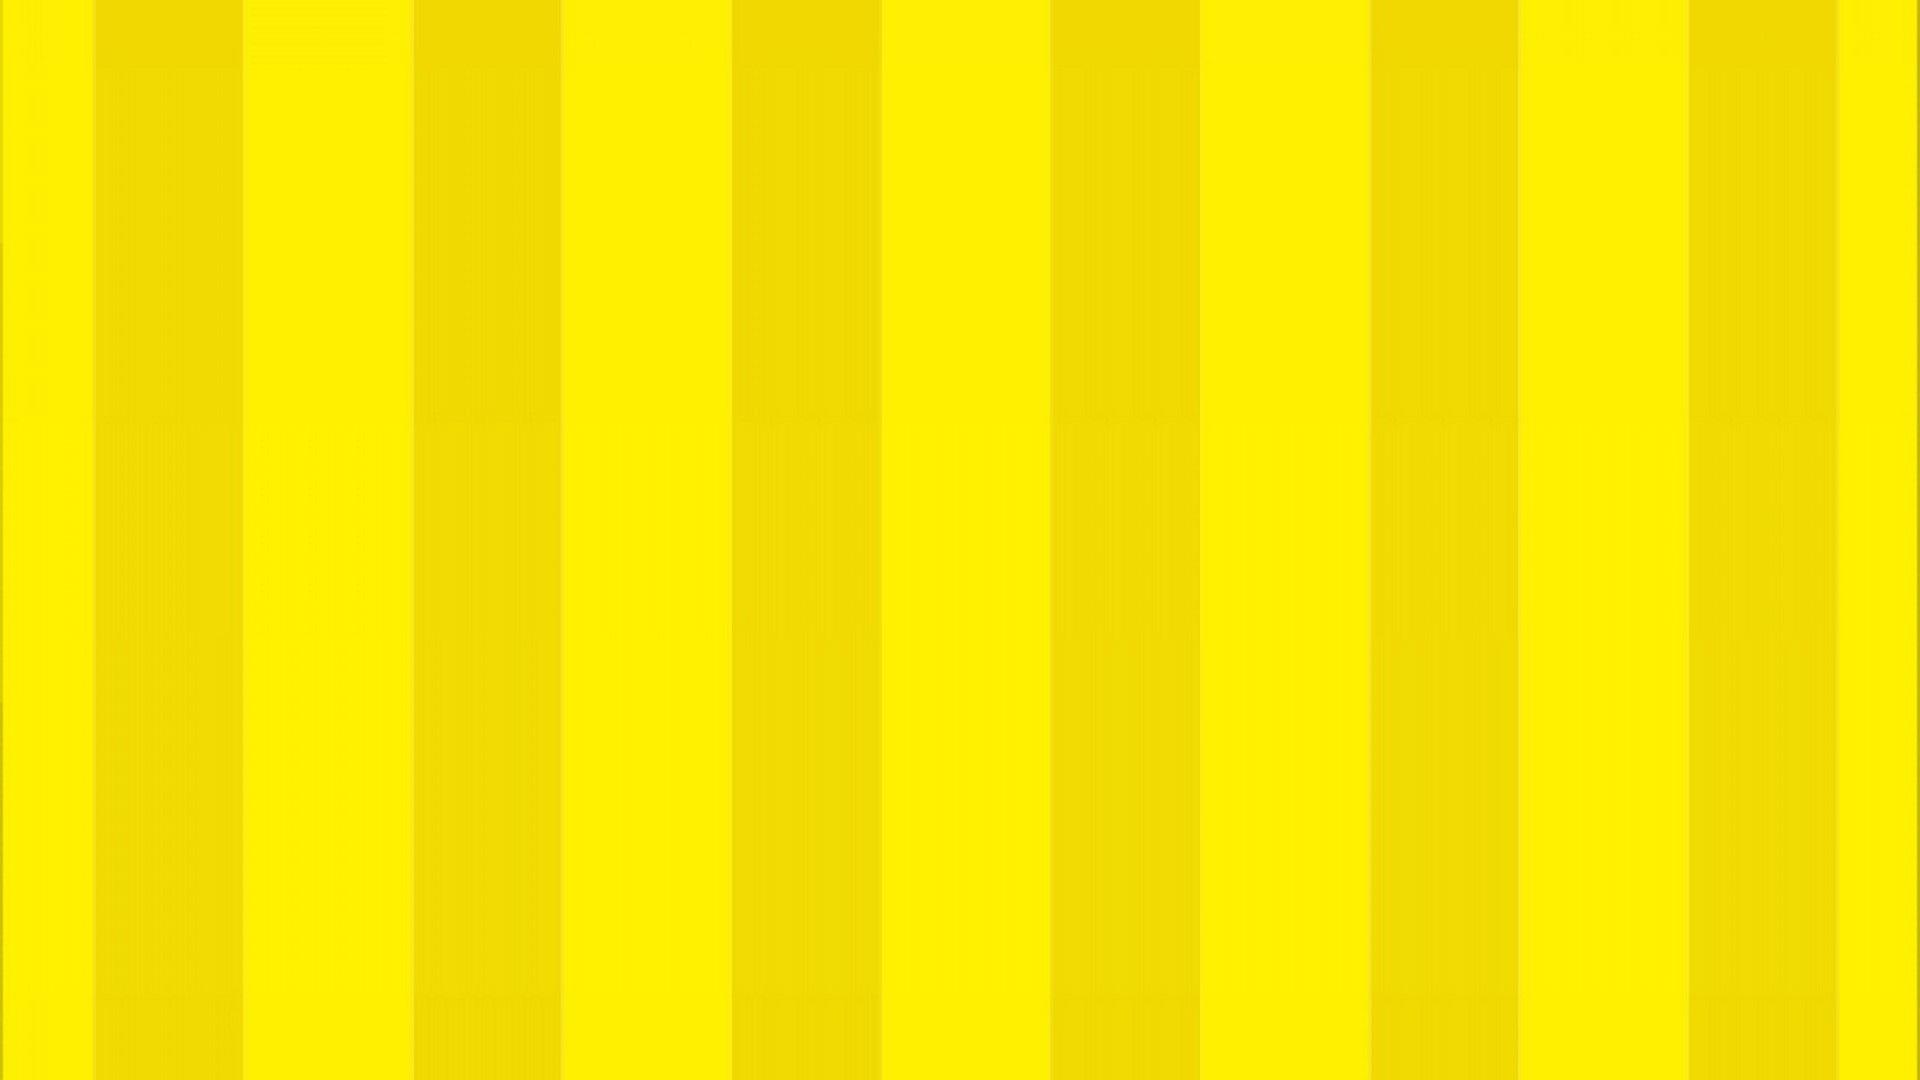 Yellow Desktop Wallpaper with image resolution 1920x1080 pixel. You can use this wallpaper as background for your desktop Computer Screensavers, Android or iPhone smartphones